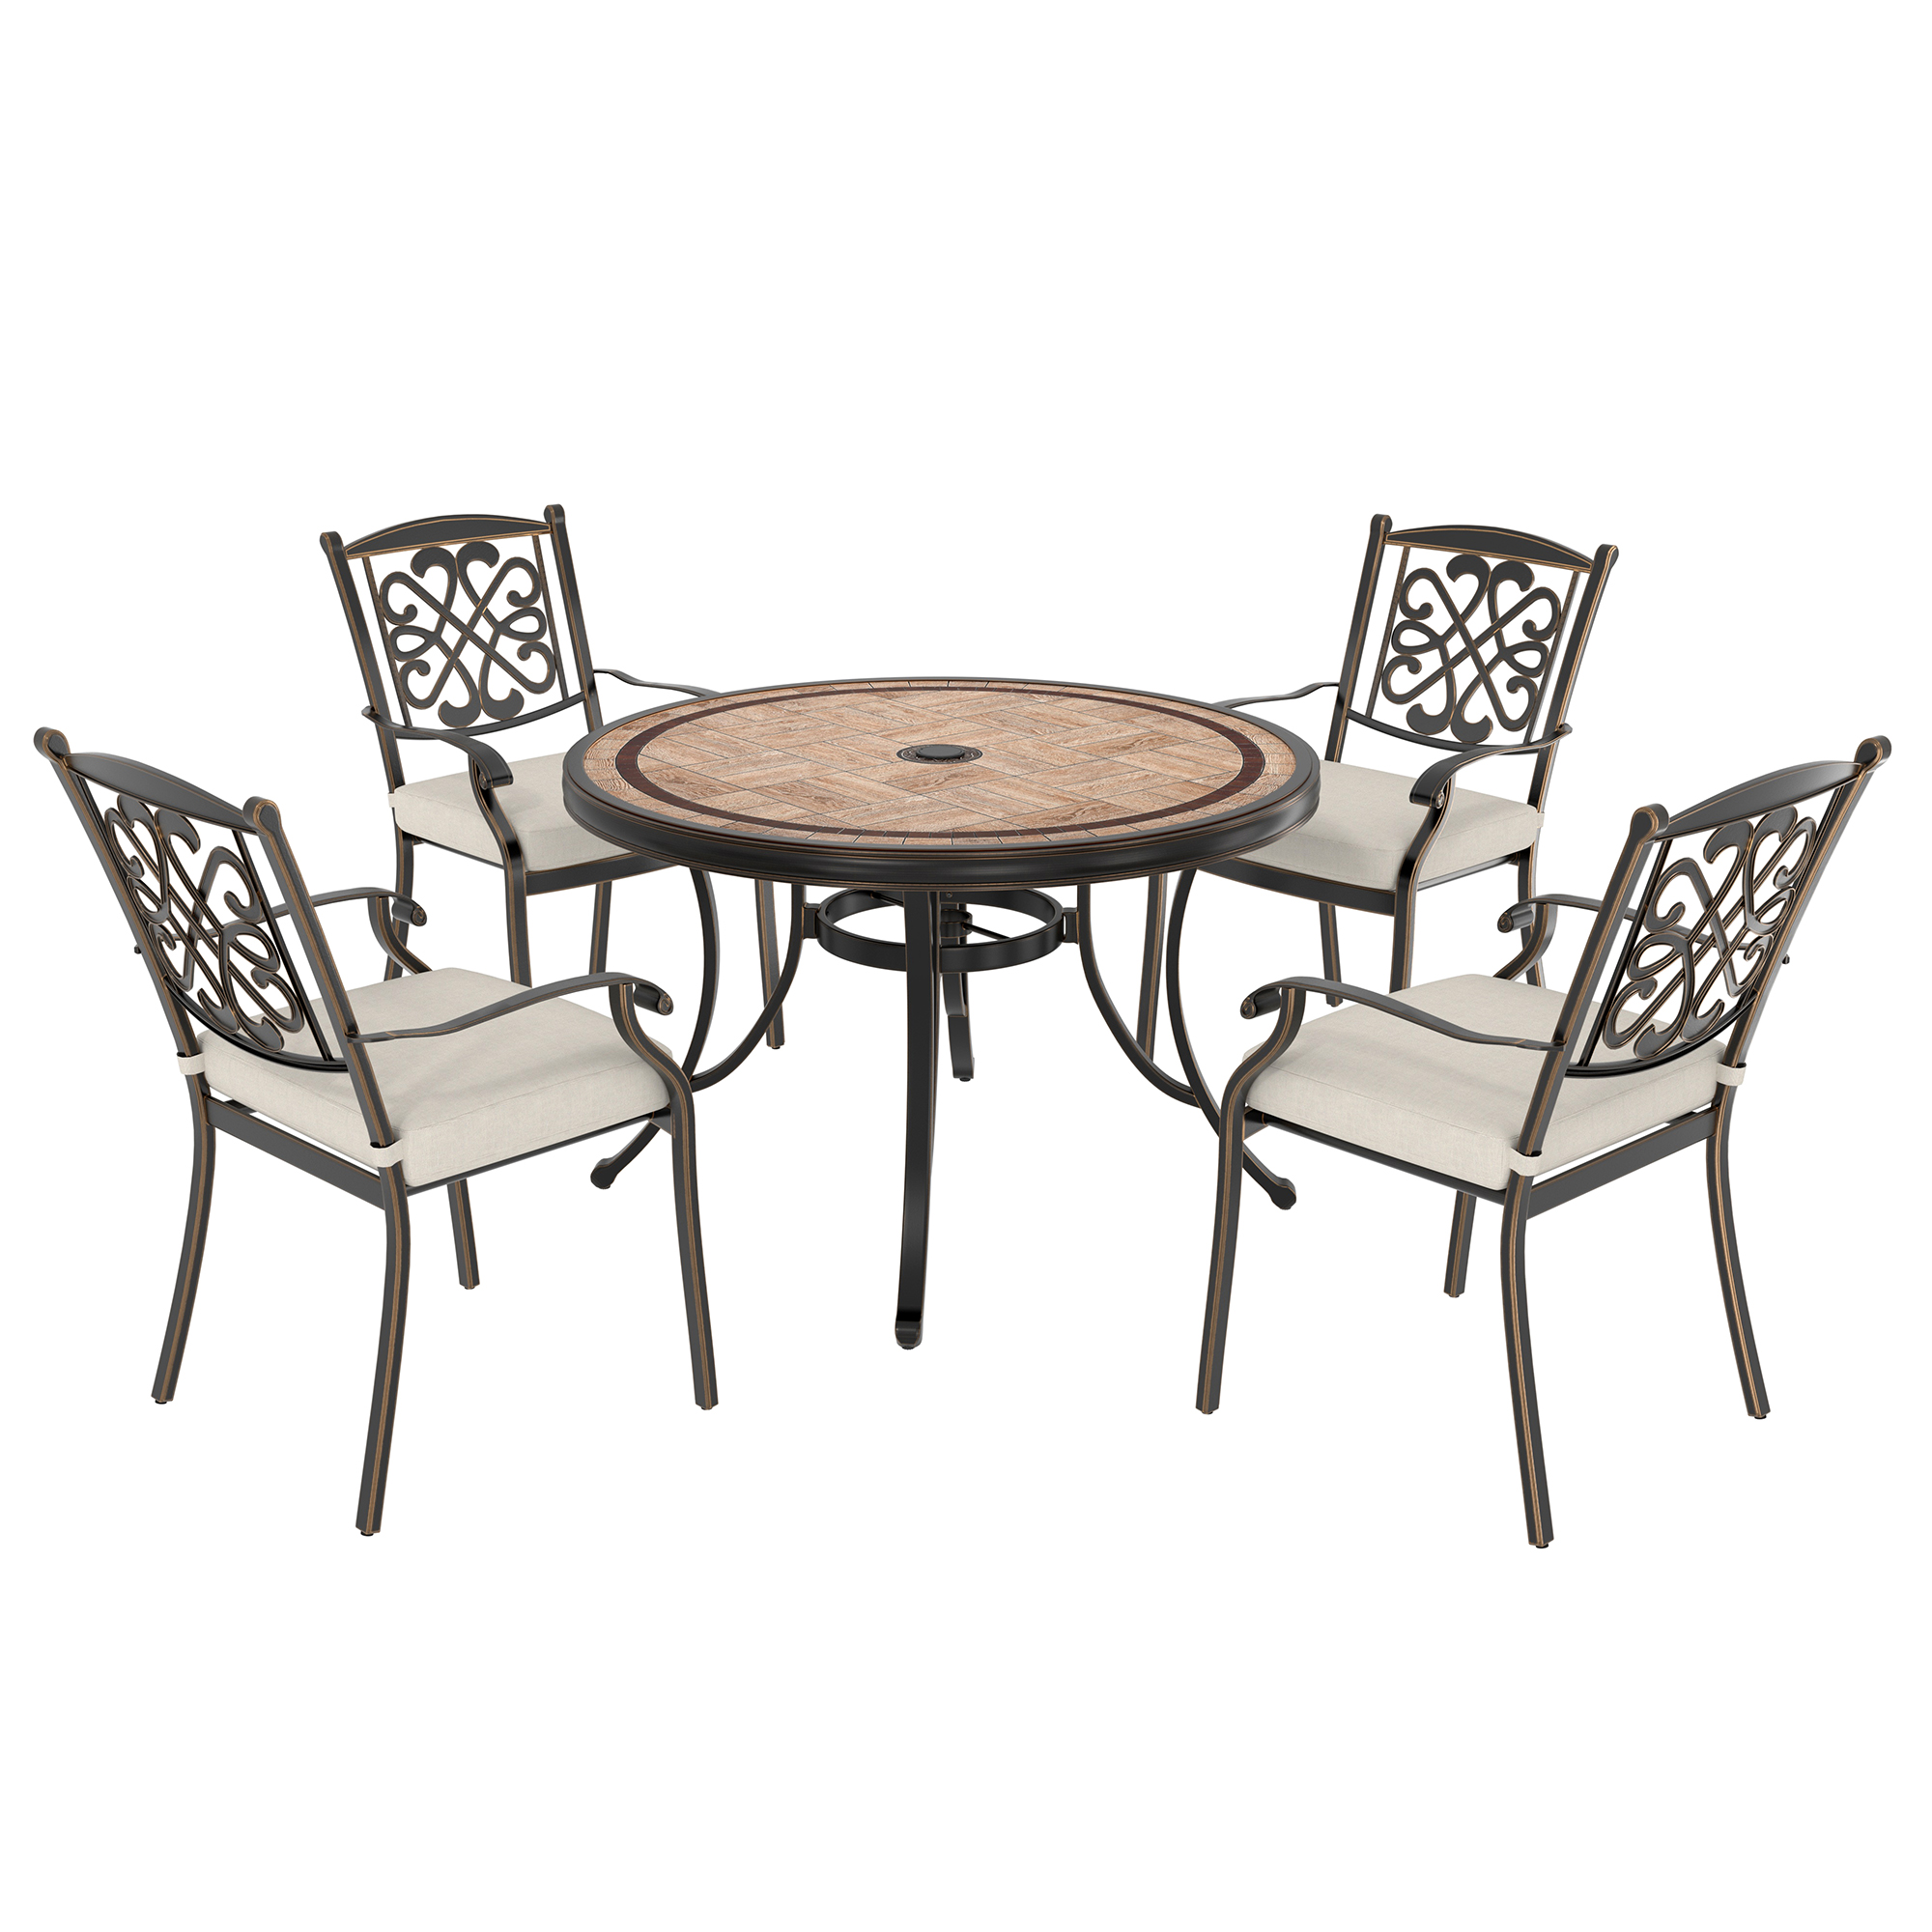 Mondawe 5Pcs Cast Aluminum Dining Set with Round Tile-Top Table and Flower-Shaped Backrest Dining Chairs In Red/Beige-Mondawe